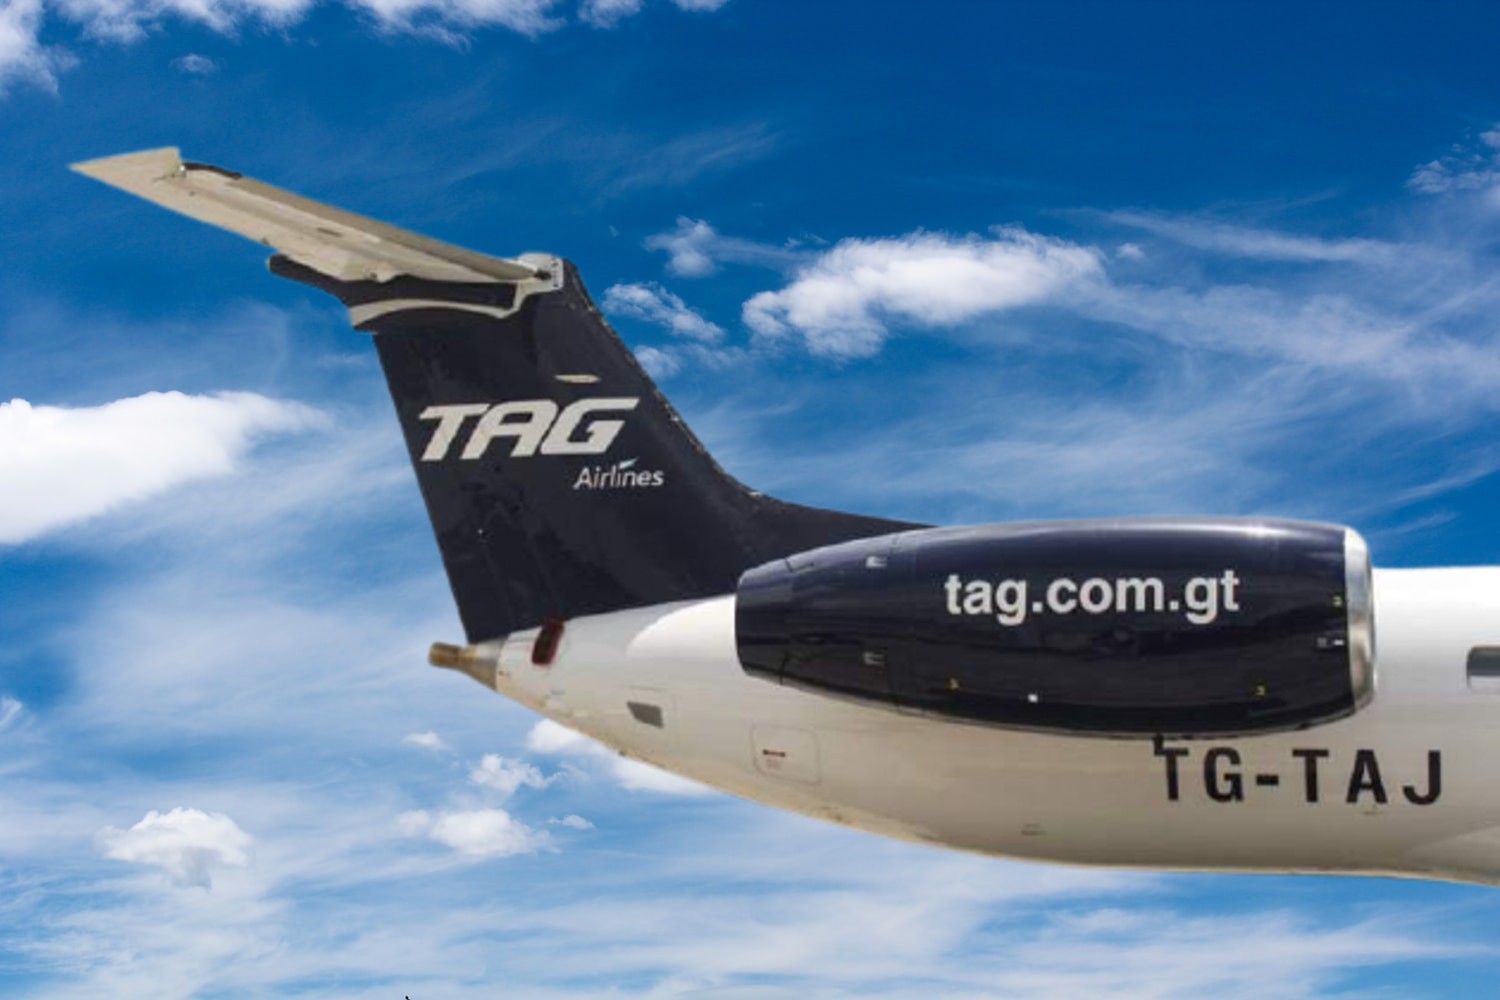 TAG Airlines